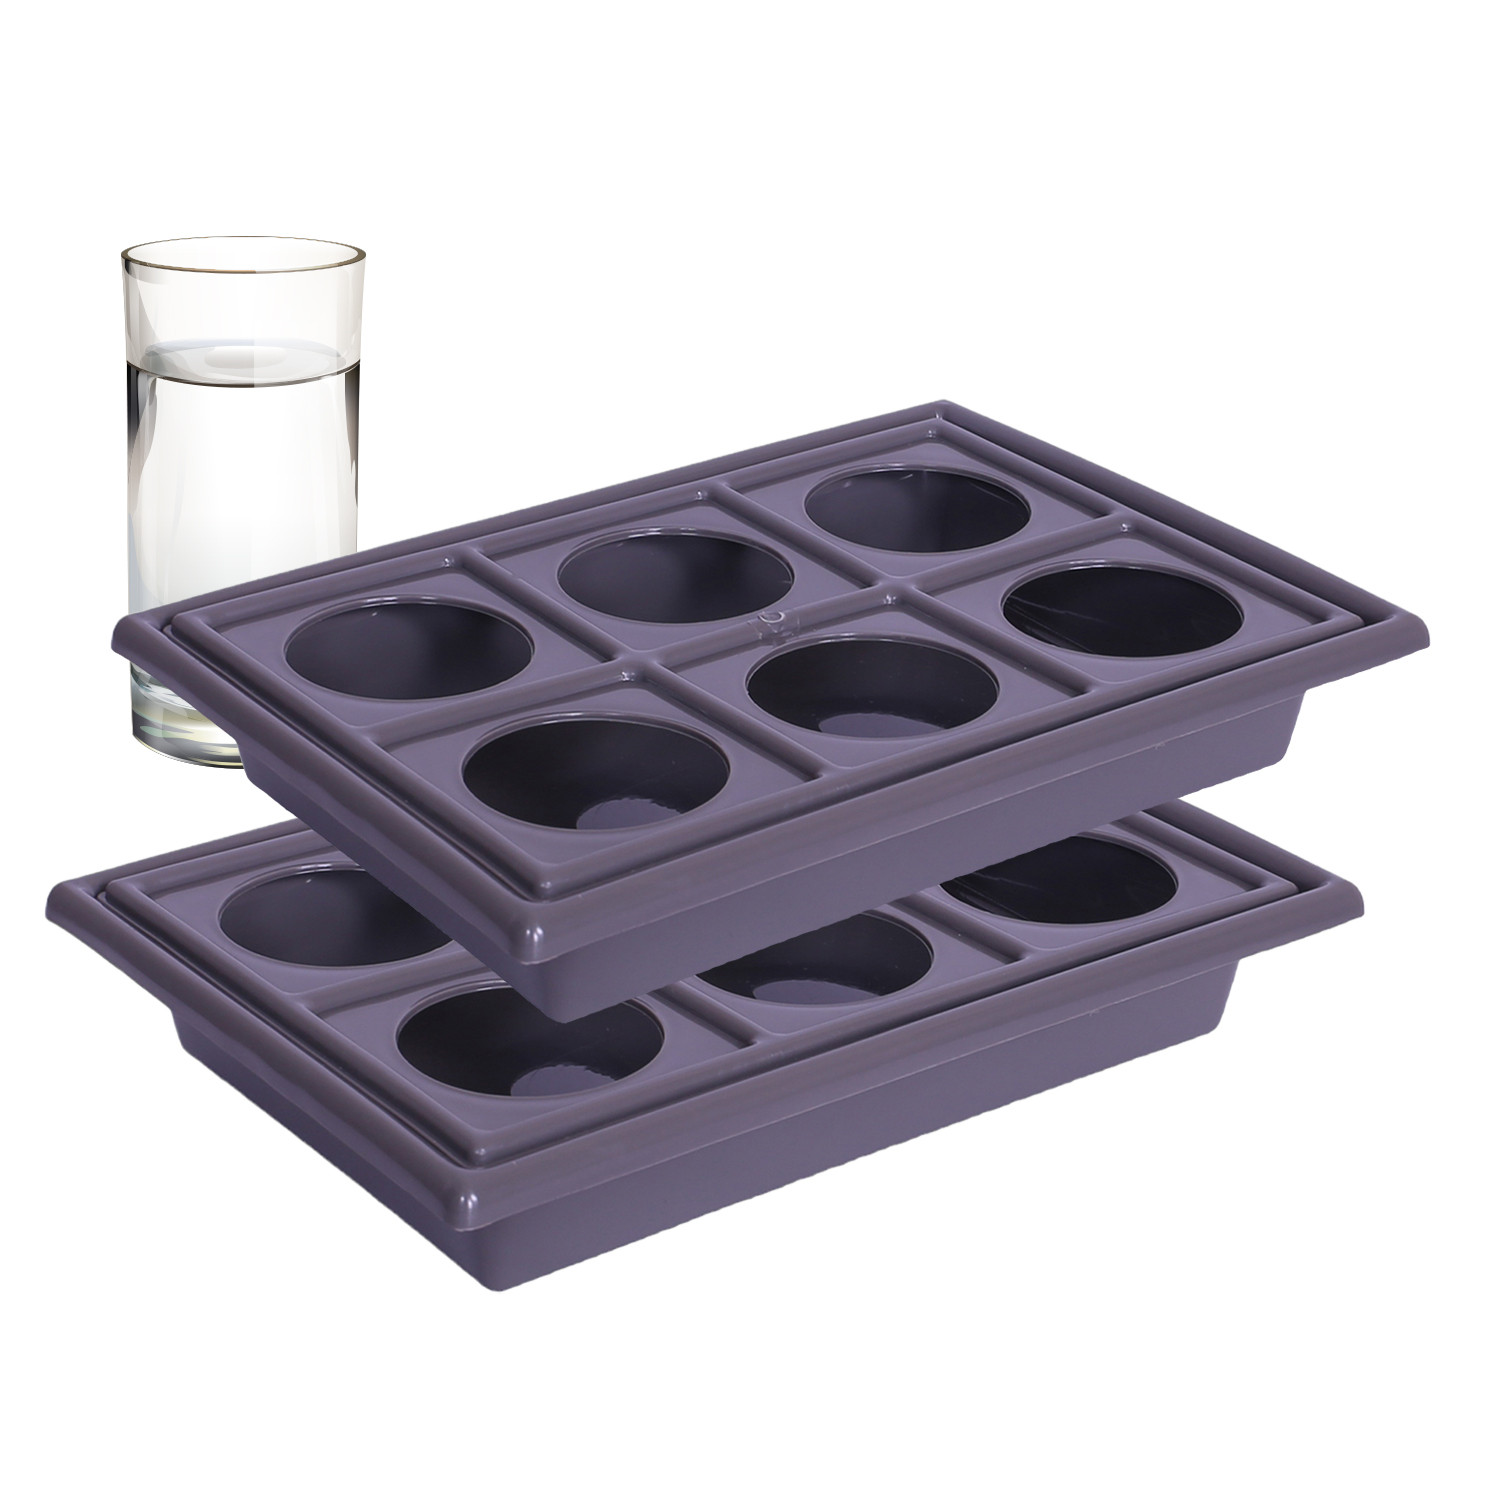 Kuber Industries Glass Tray | Plastic Glass Holder | Tray with Cutout Handles | Glass Serving Tray | Glass Holder Tray for Seving | Kitchen Serving Tray | Gray